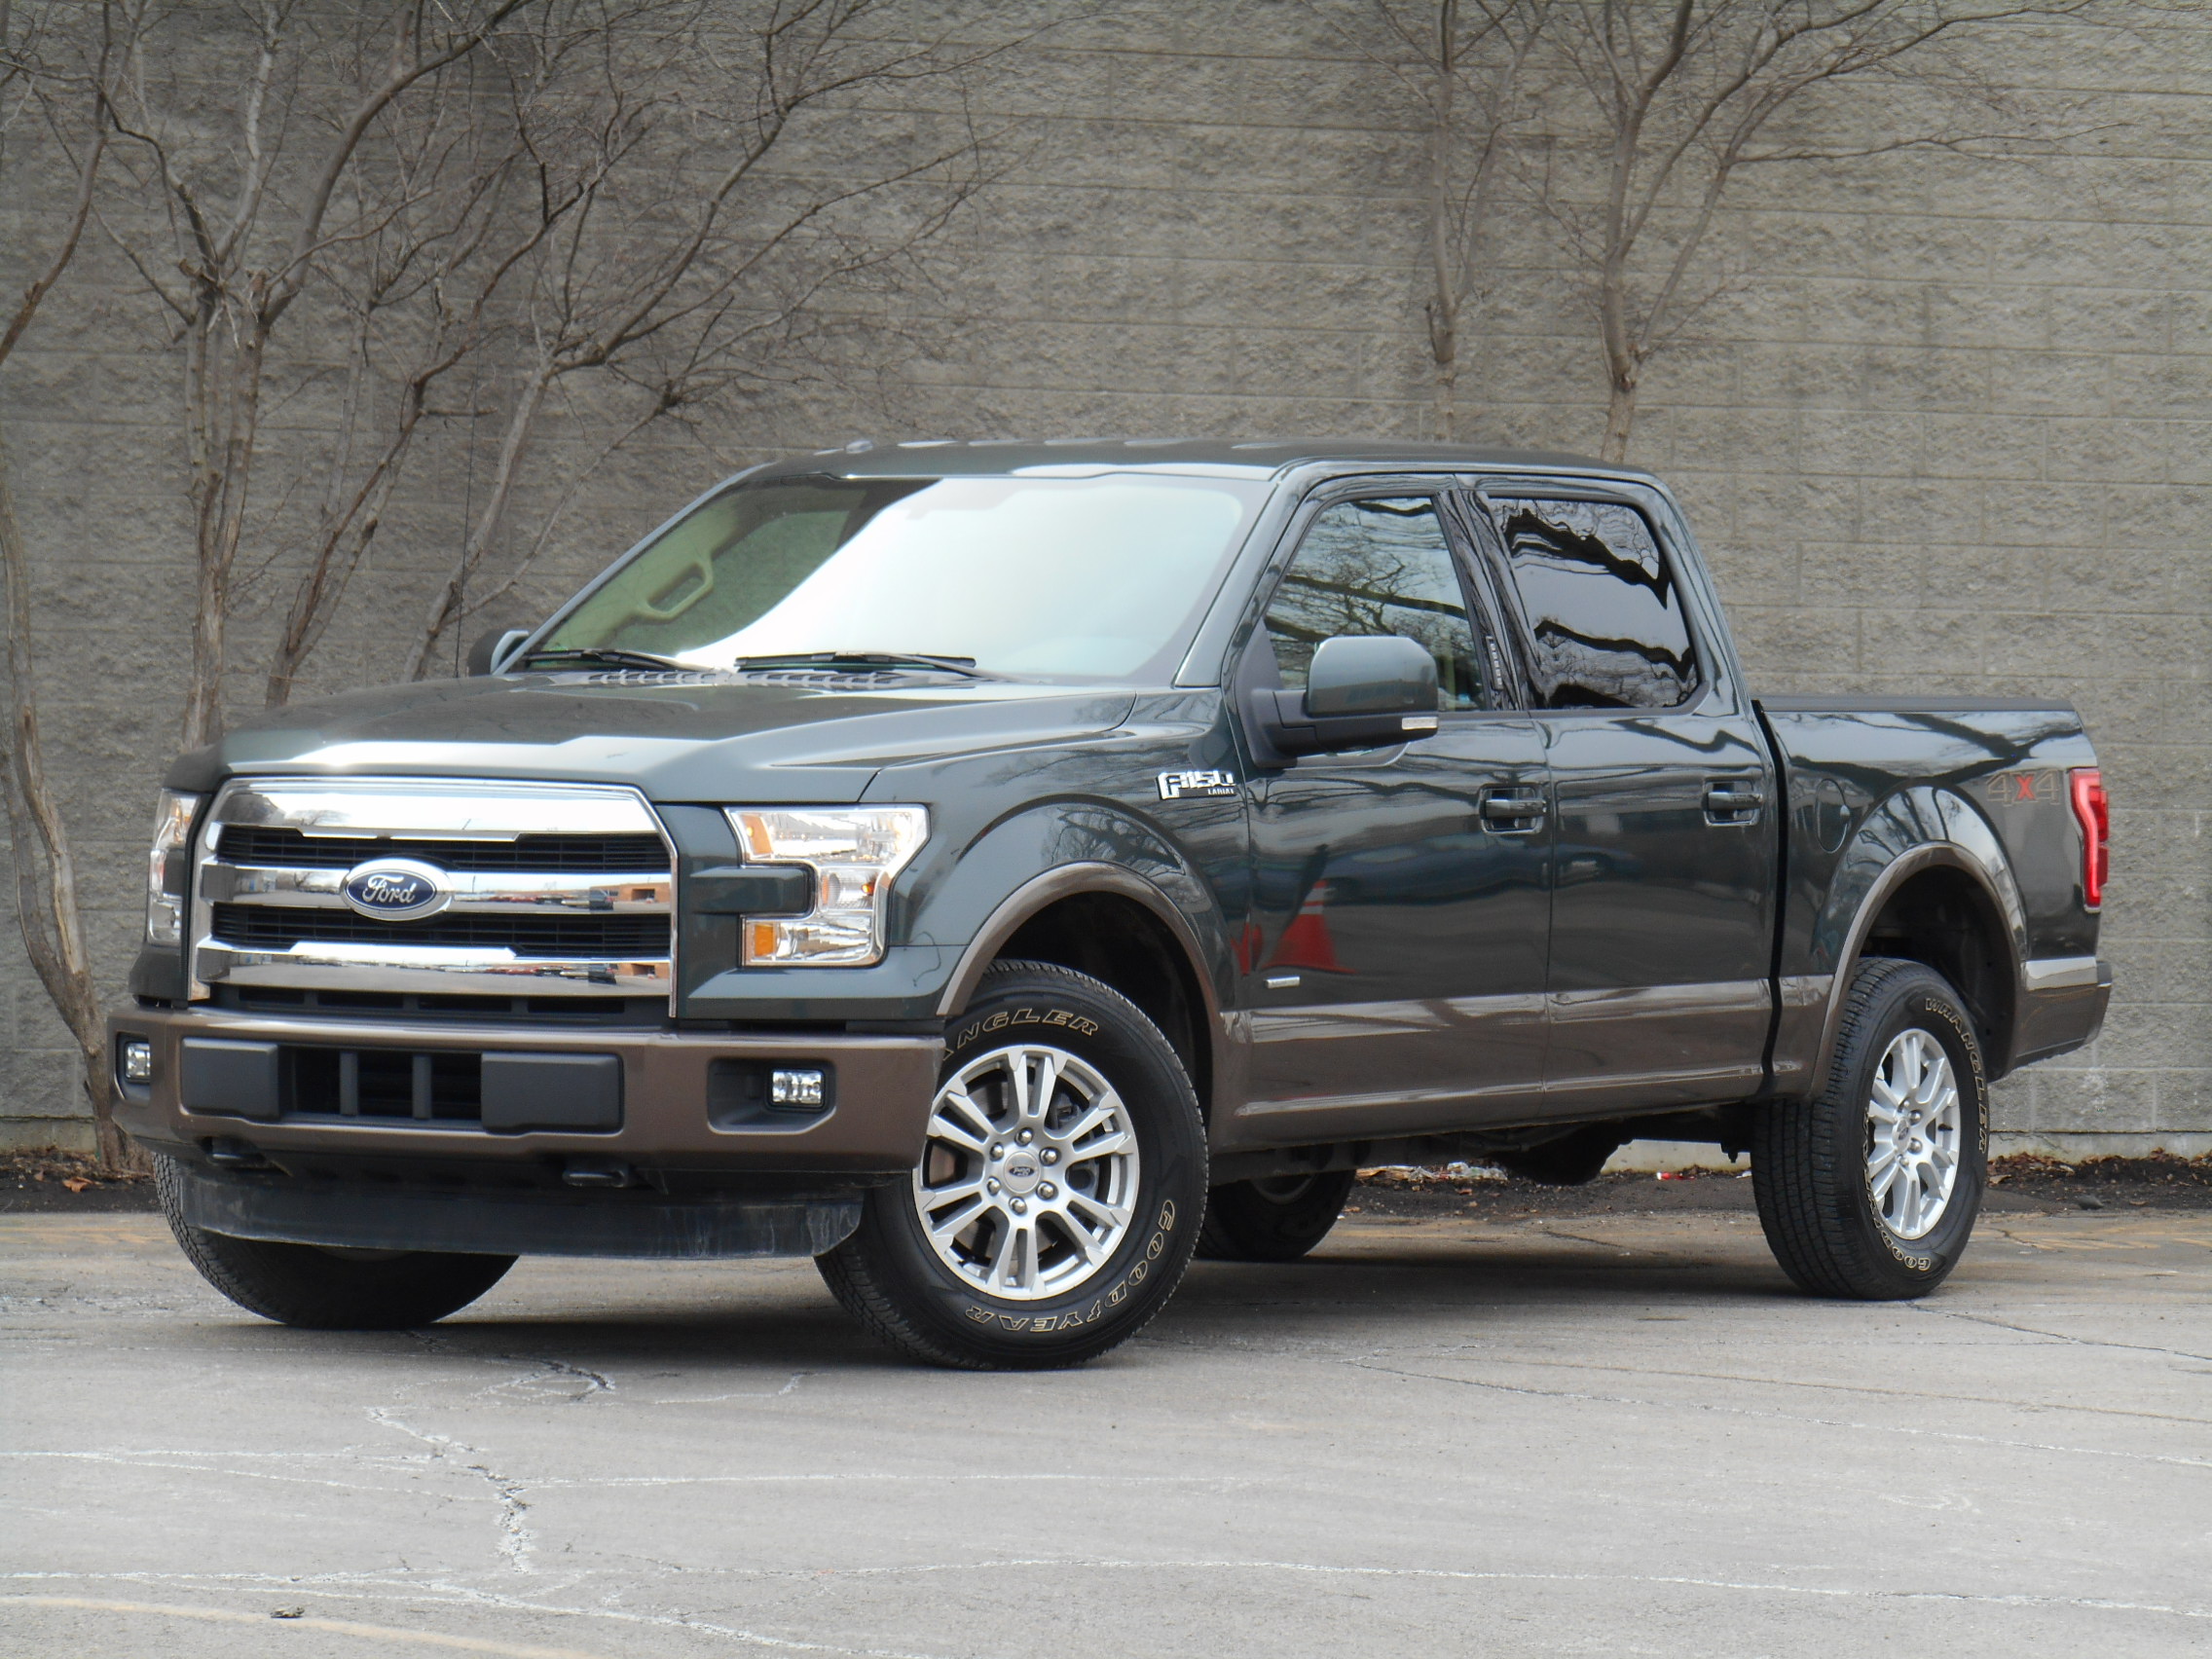 Test Drive: 2015 Ford F-150 Lariat 2.7L EcoBoost | The Daily Drive